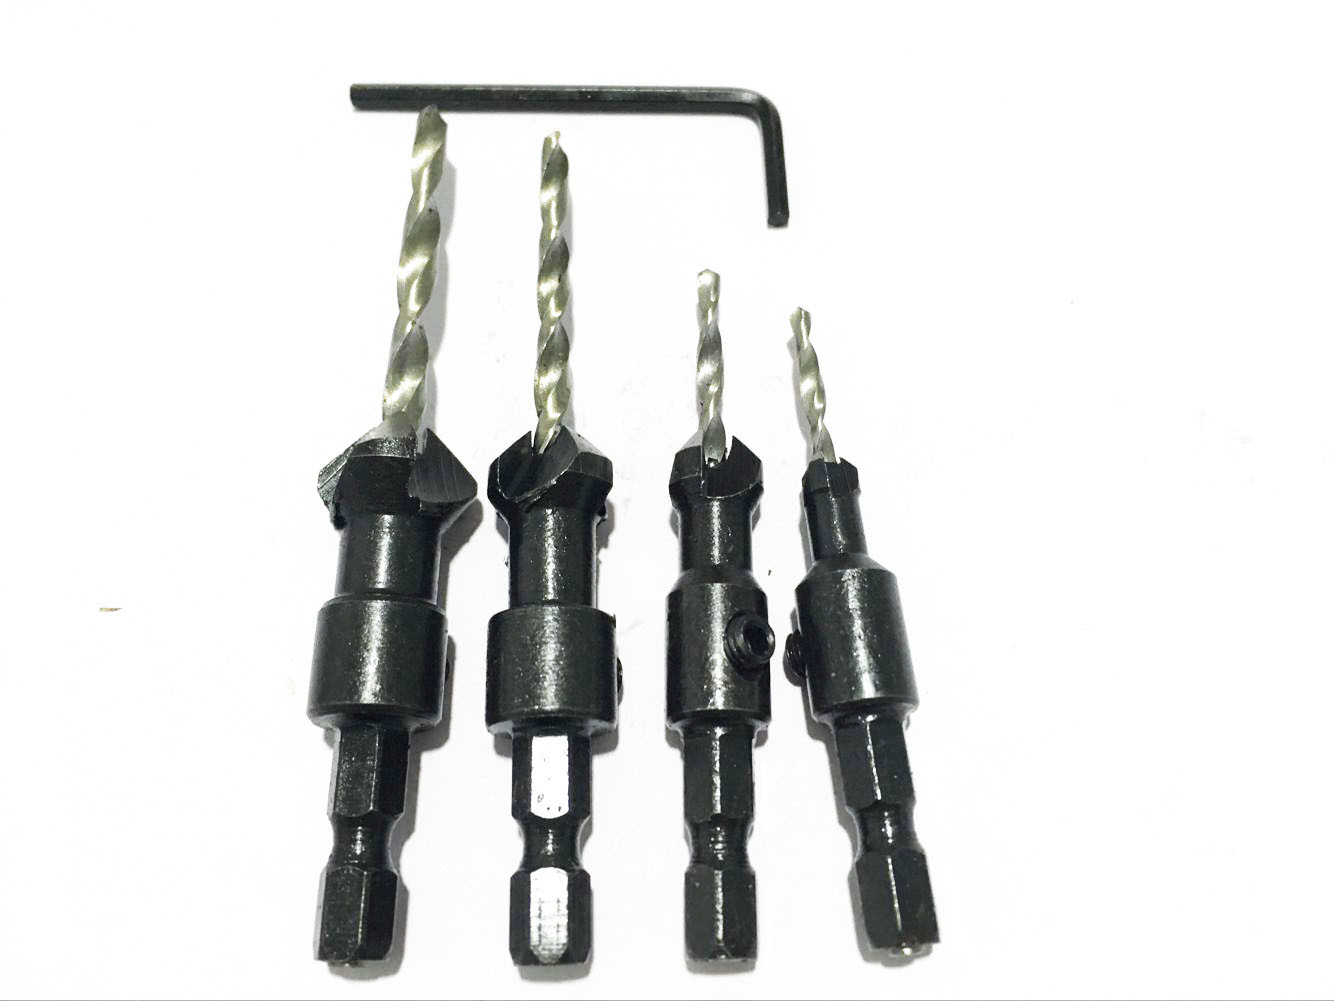 HSS Drill Bits Screw Countersink Drill Bits for Woodworking (SED-CSD)